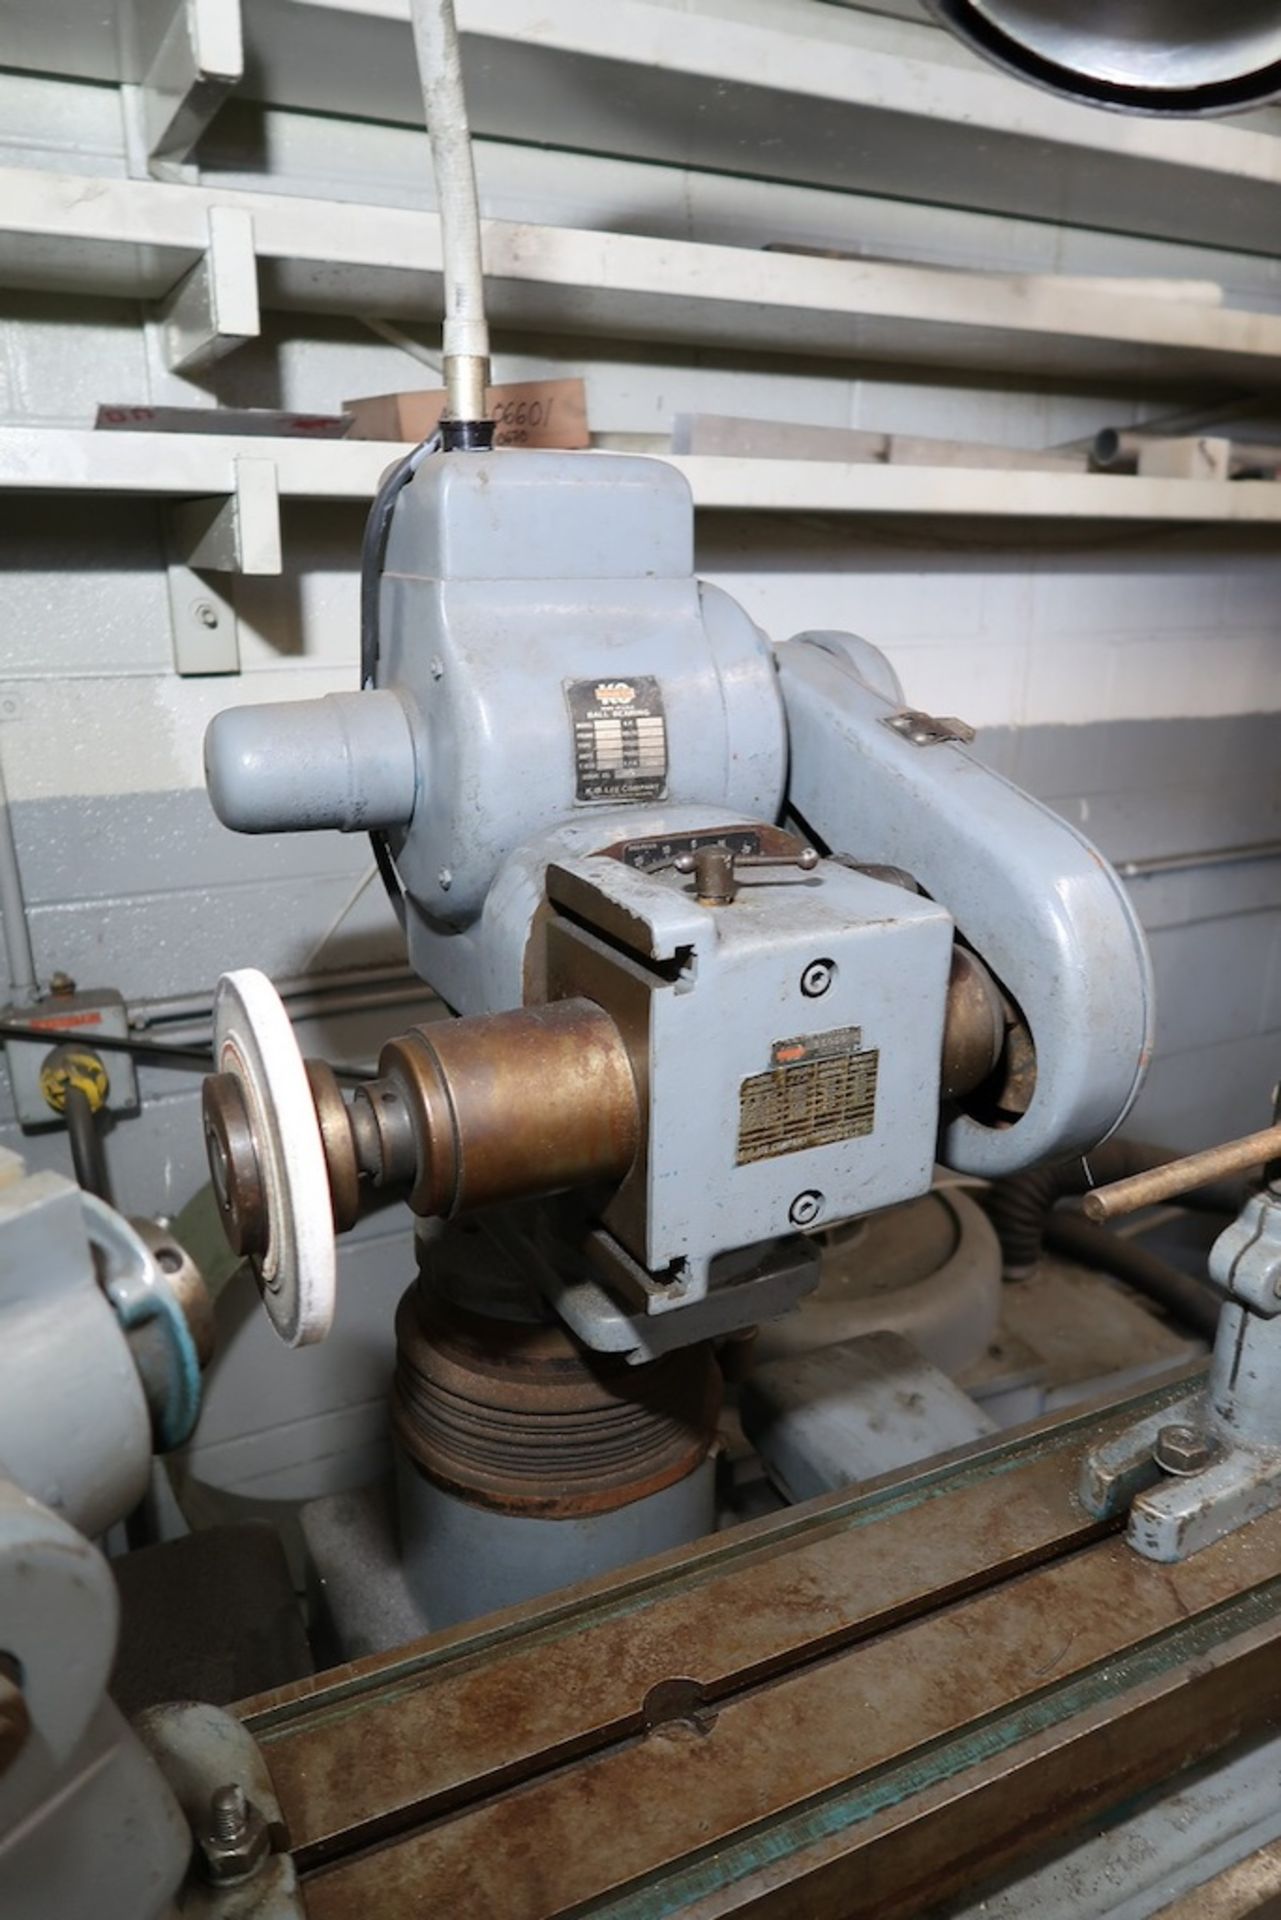 KO Lee Tool and Cutter Grinder with Cabinet of Assorted Collets, Etc. - Image 3 of 4